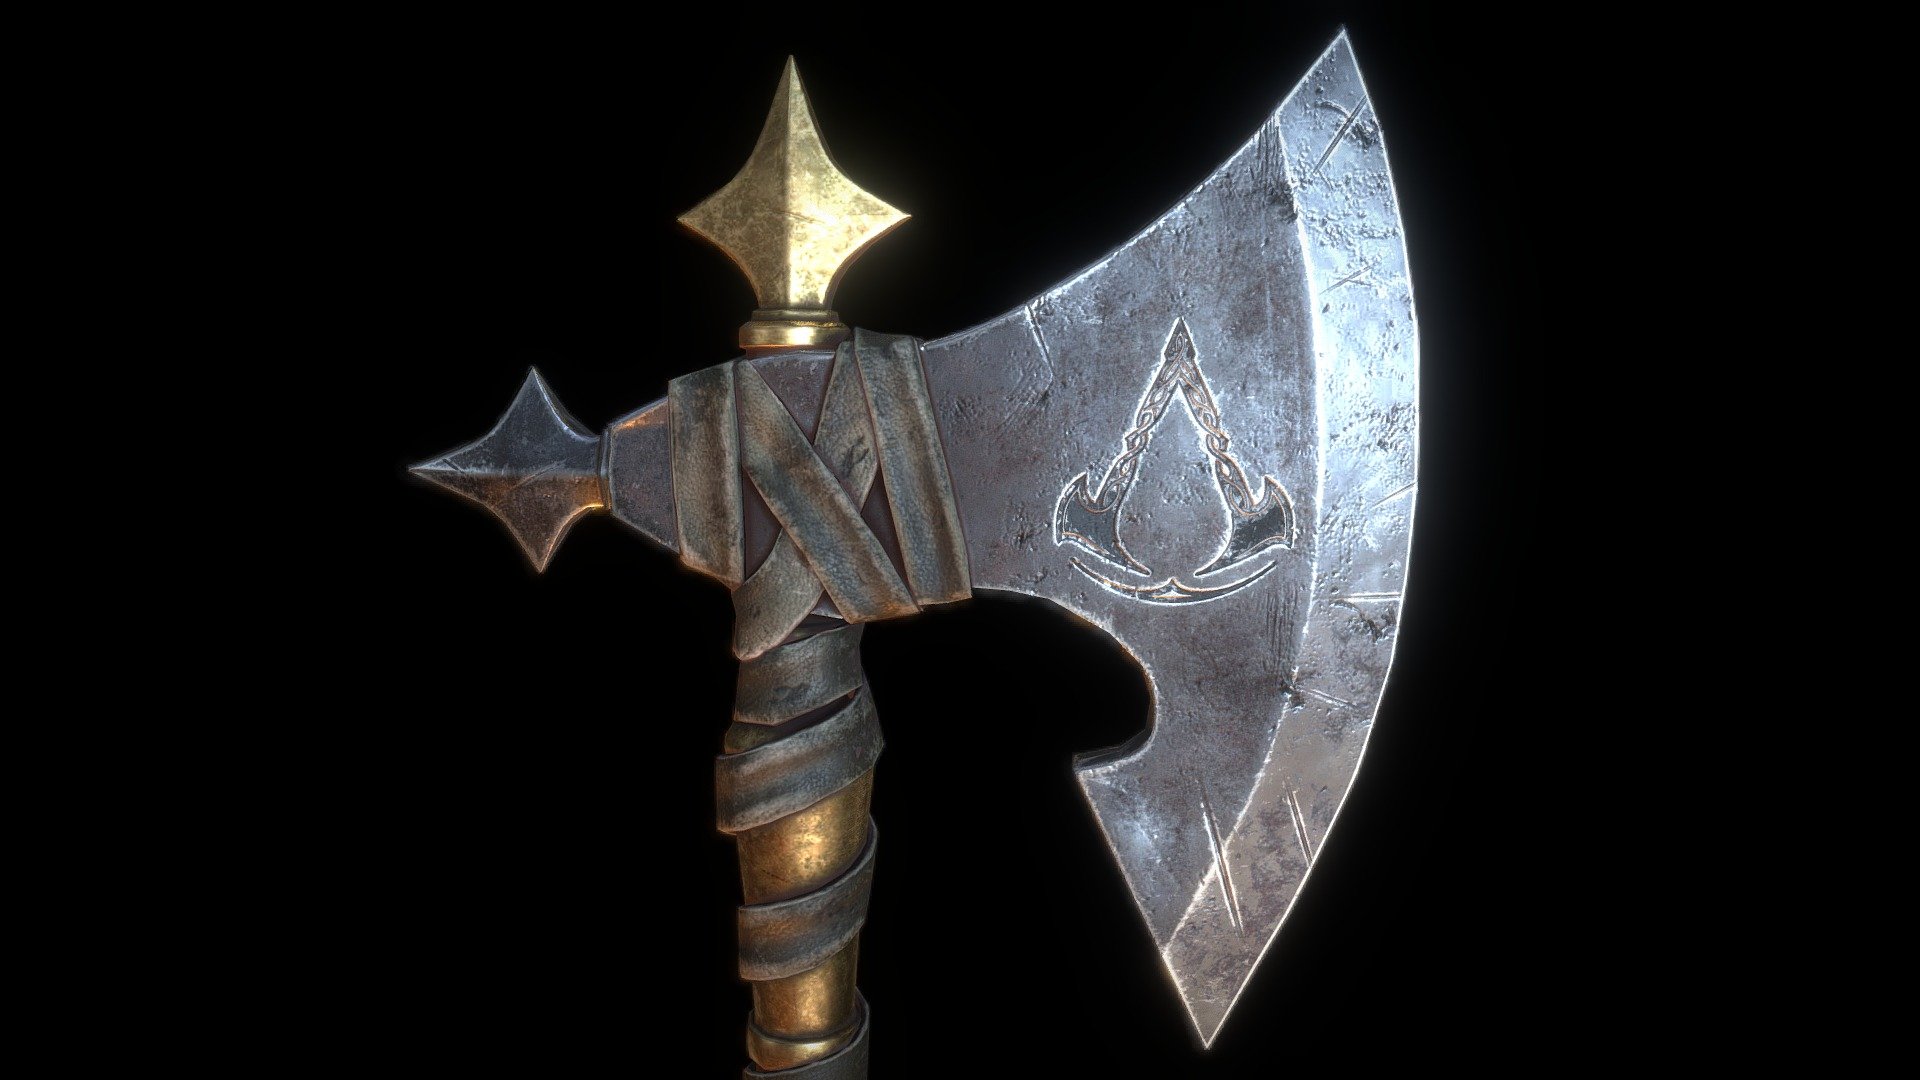 This Assassin's Creed Valhalla Axe is My one of favorite axe .I have many collecting screenshot(Trailer) &amp; Reference then I tried to re-create Viking Axe.Make with Maya and Zbrush, textured with substance painter and render with Marmoset tool bag.Any feedback on every aspect is welcome!Hope you Like it - Assassin's Creed Valhalla Fan Art Axe - Buy Royalty Free 3D model by Pratik Jadhav (@PratikJadhav) 3d model